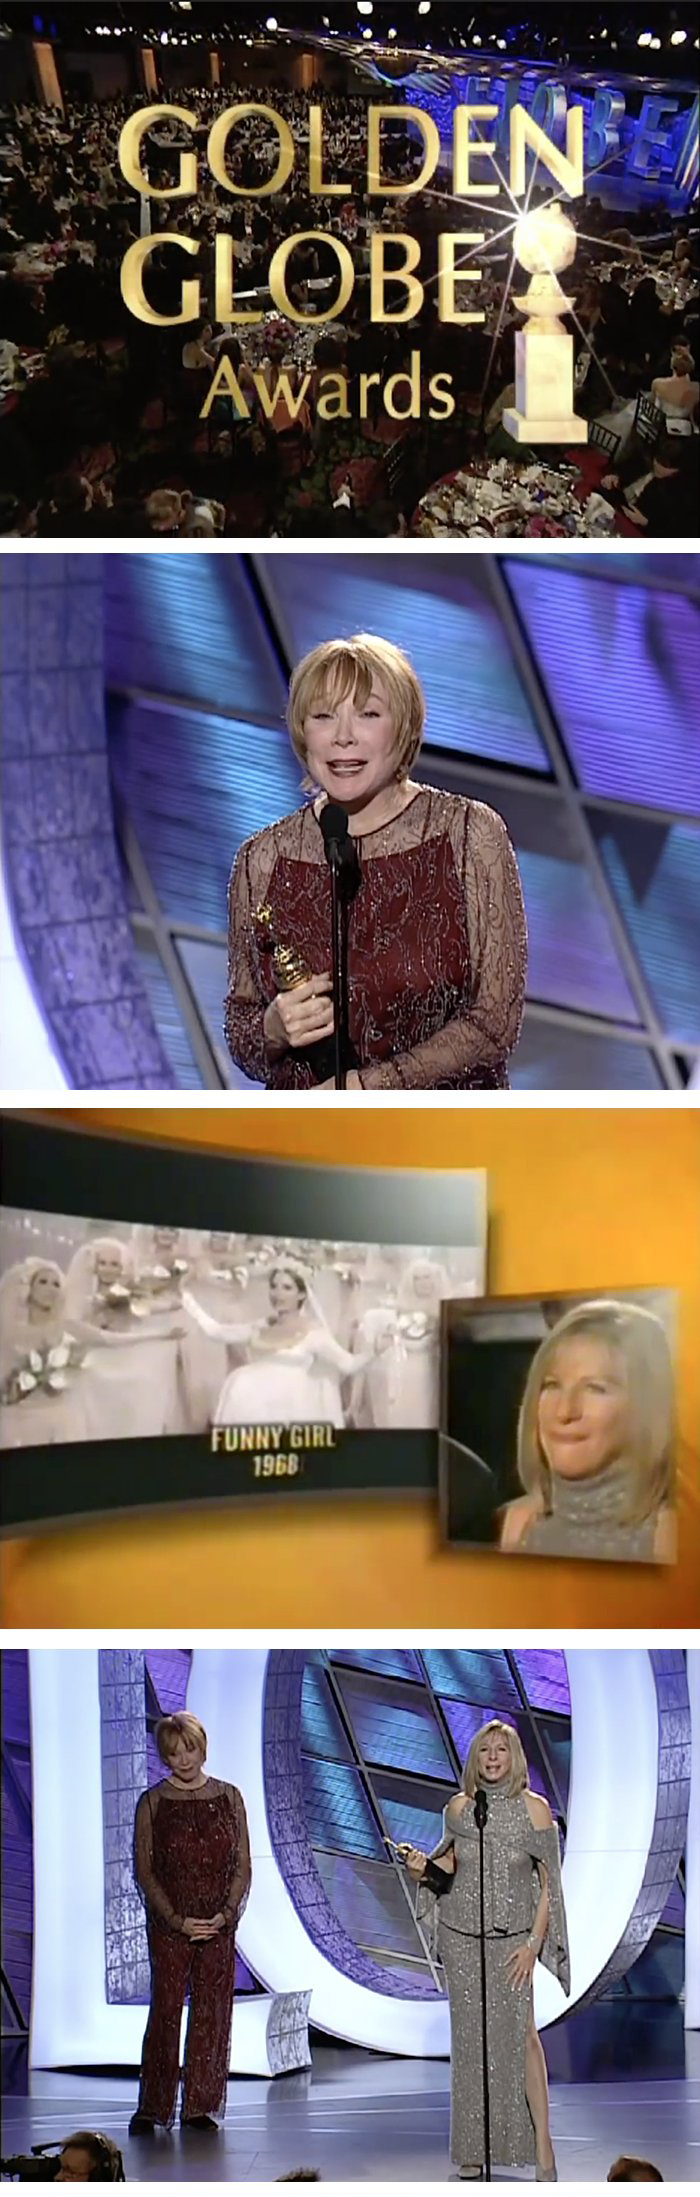 Scenes from the 2000 Golden Globes with Barbra Streisand, Shirley MacLaine and James Brolin.